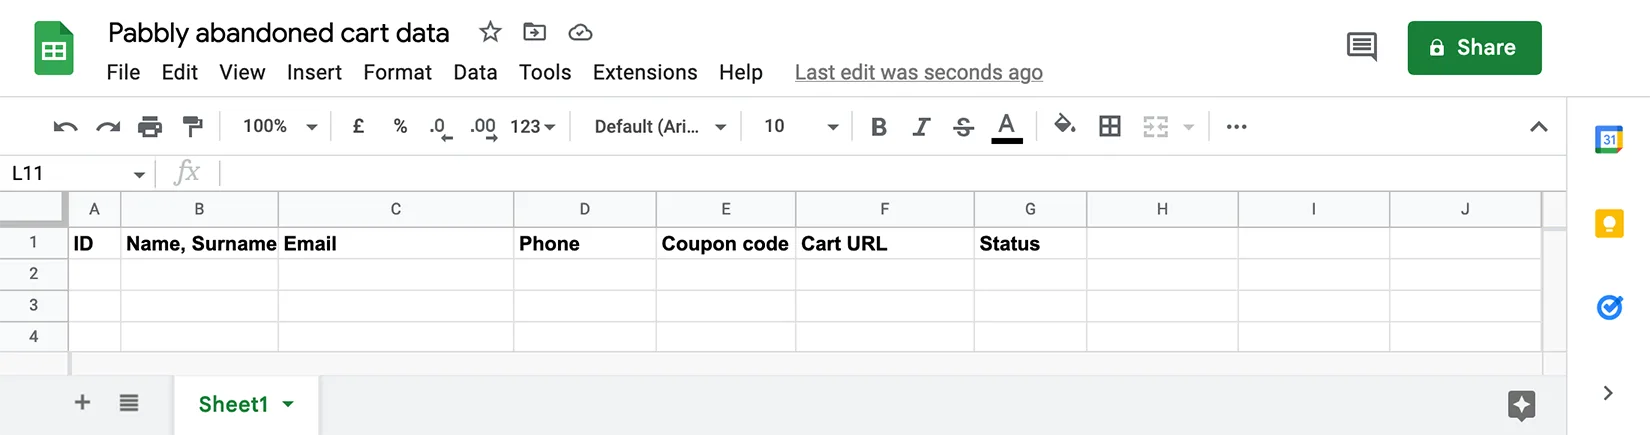 Google spreadsheet with column headers for storing abandoned carts